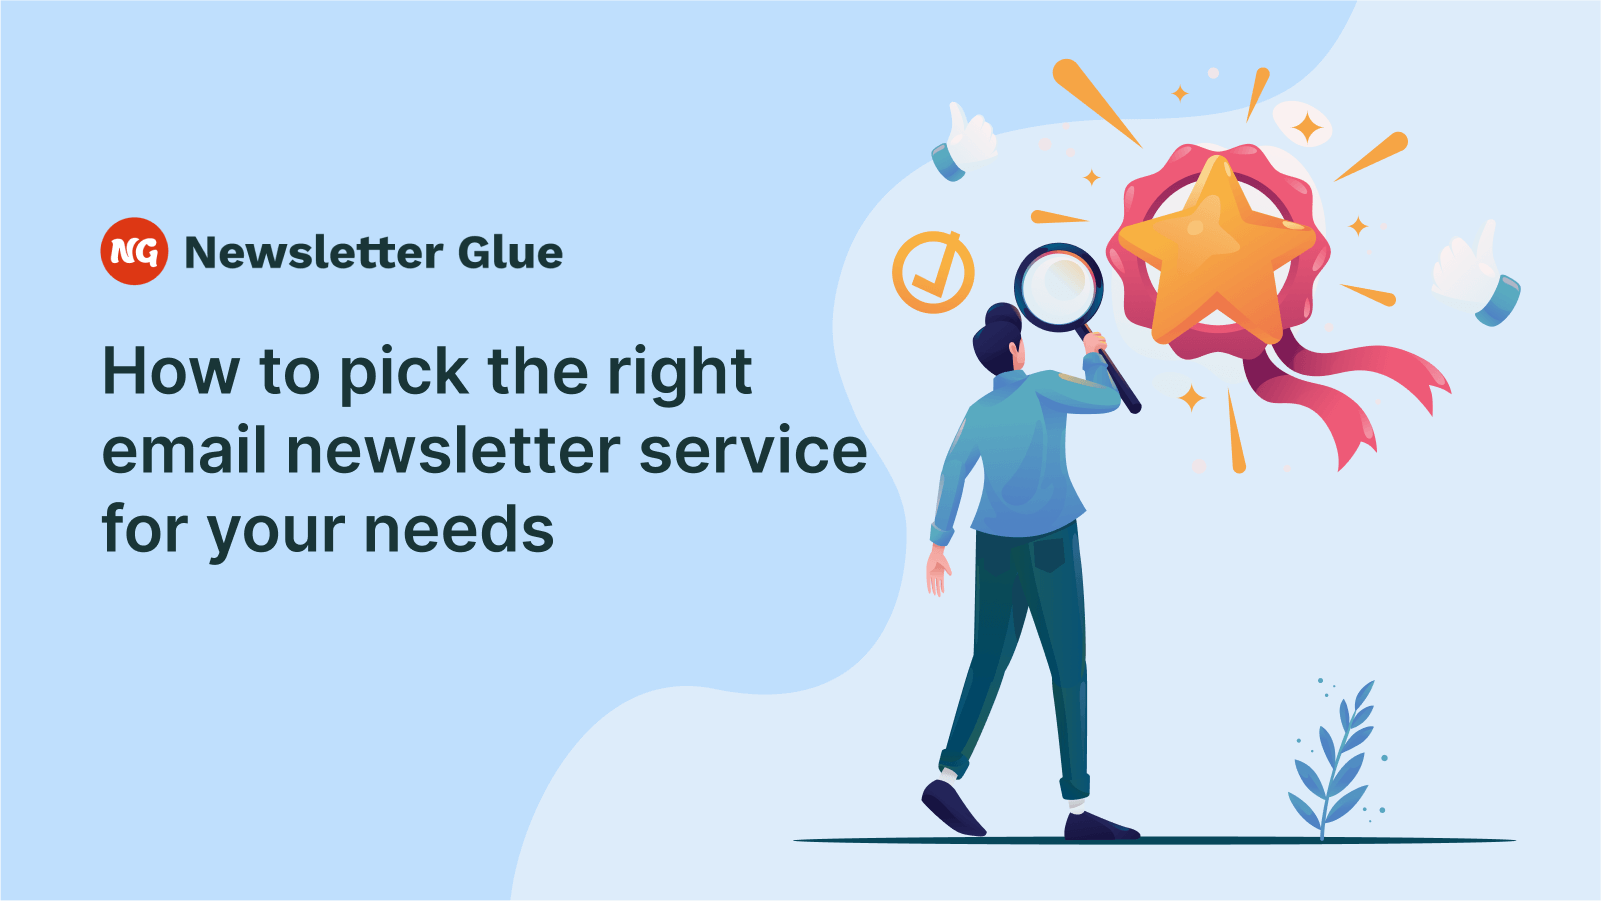 How to pick the right email newsletter service for your needs